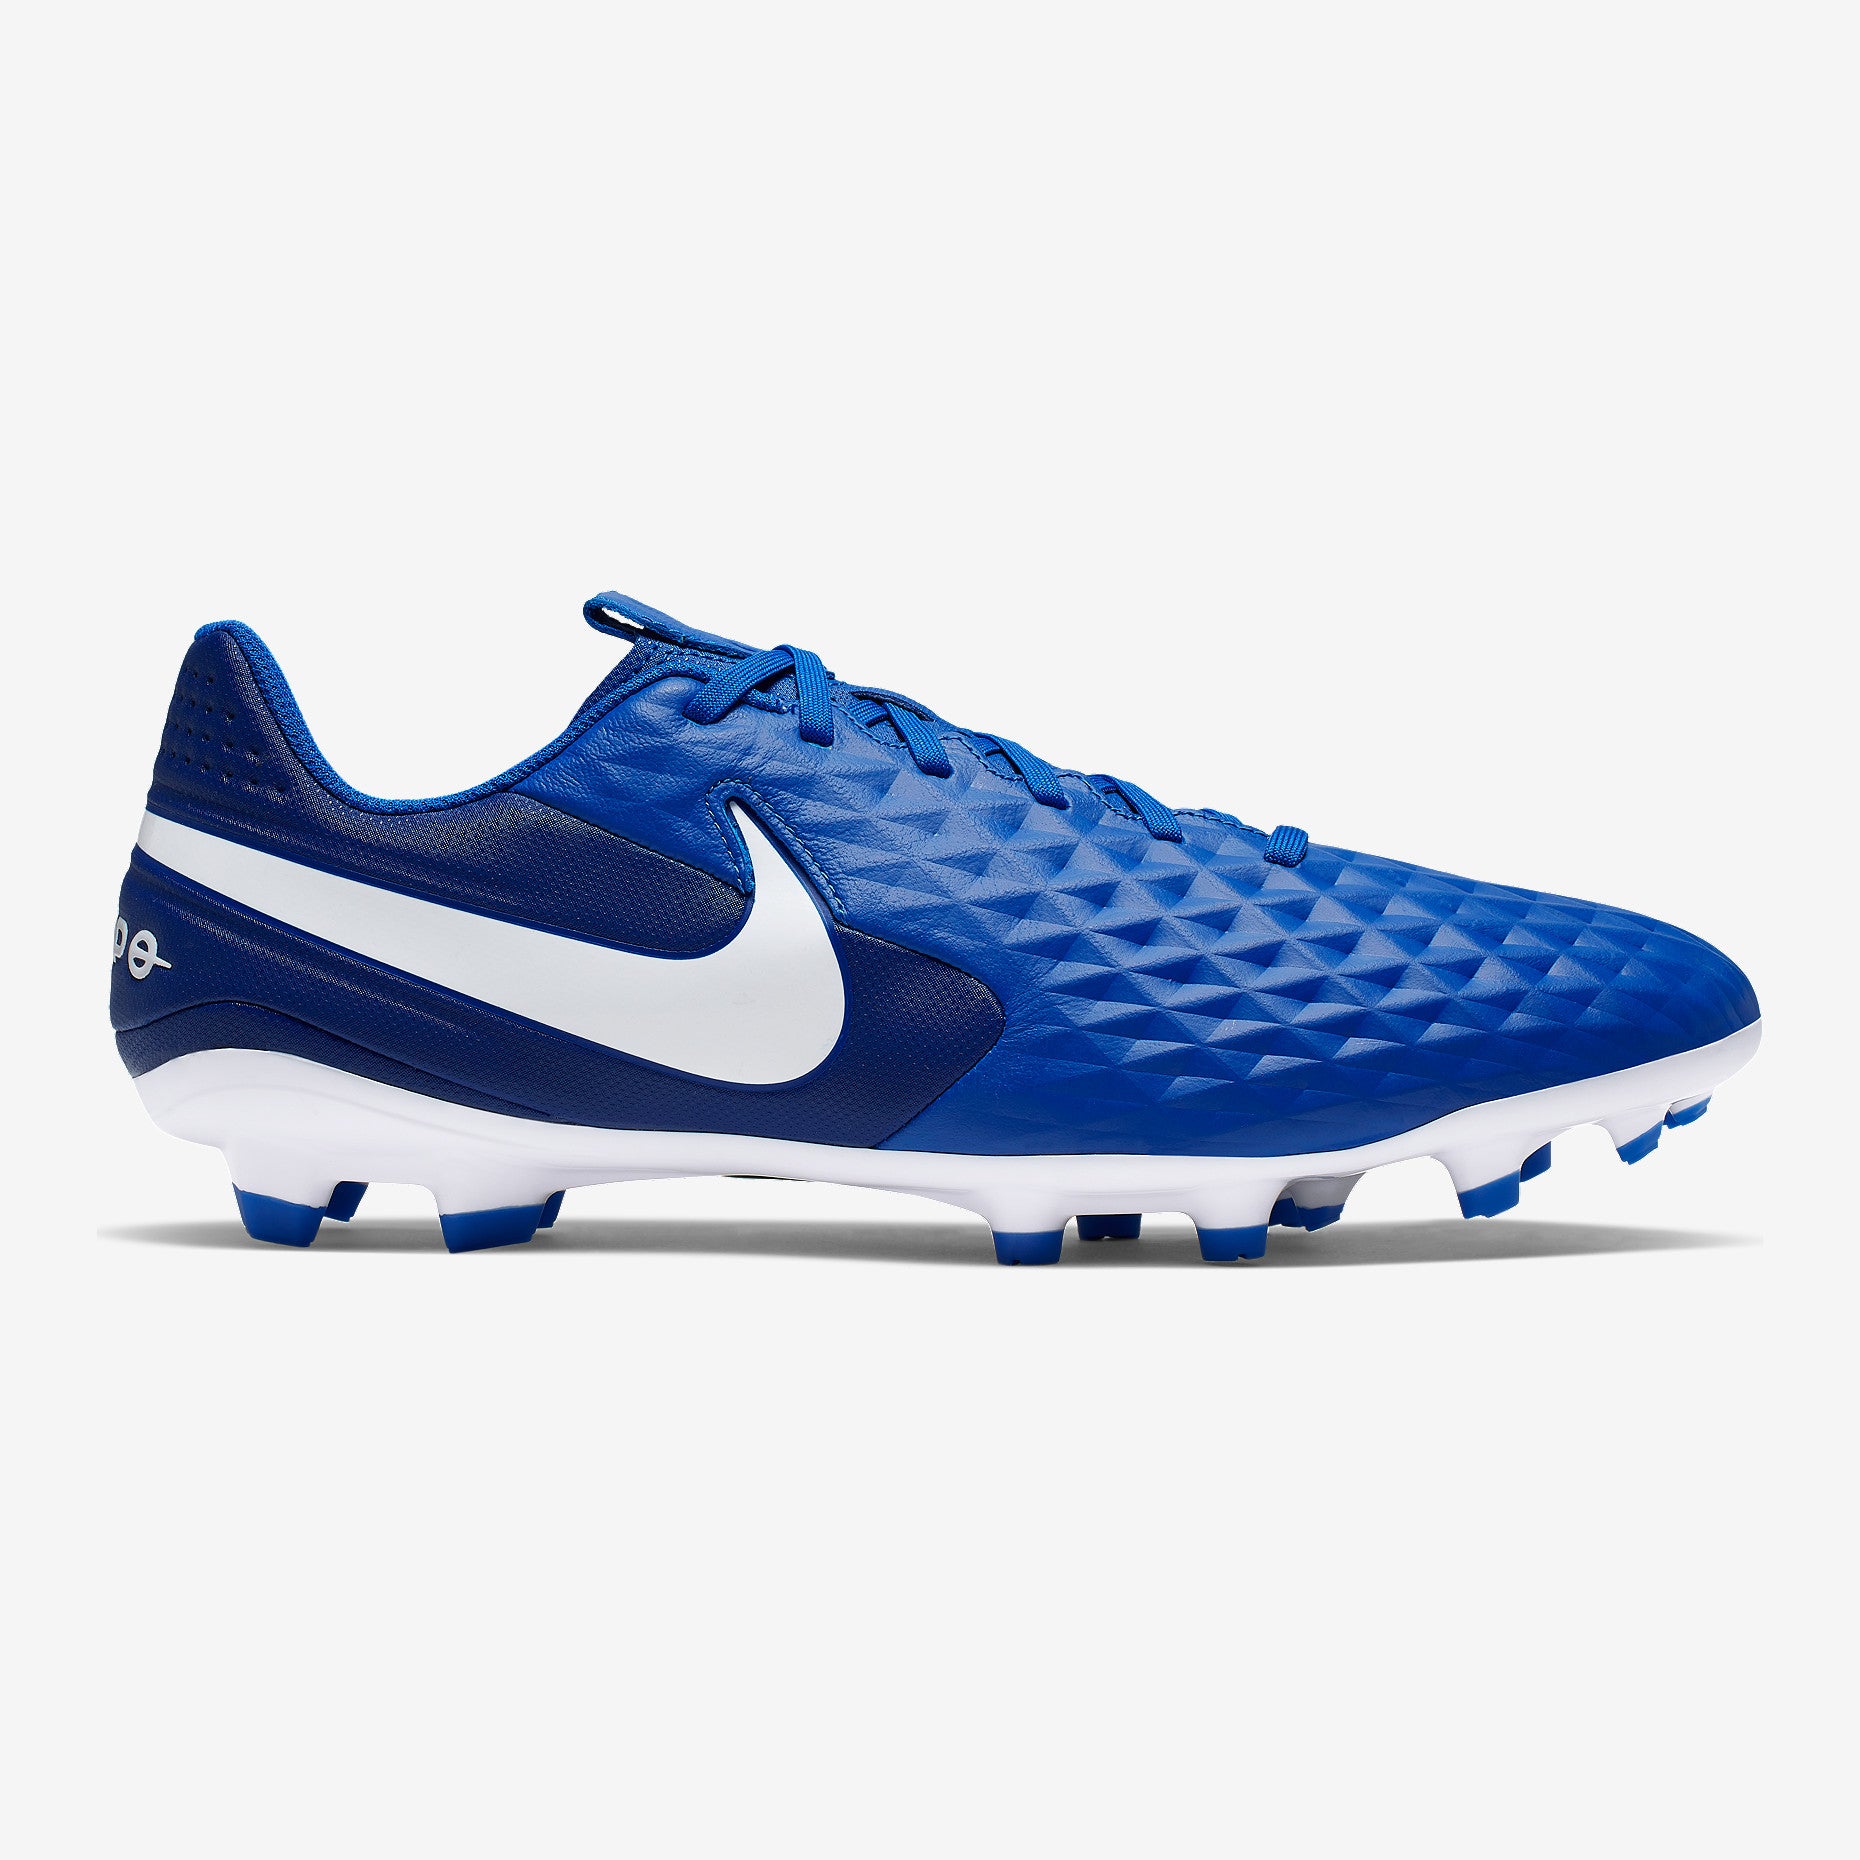 Pike shoes Nike Time Legend 8 Academy IC AT6099 061.